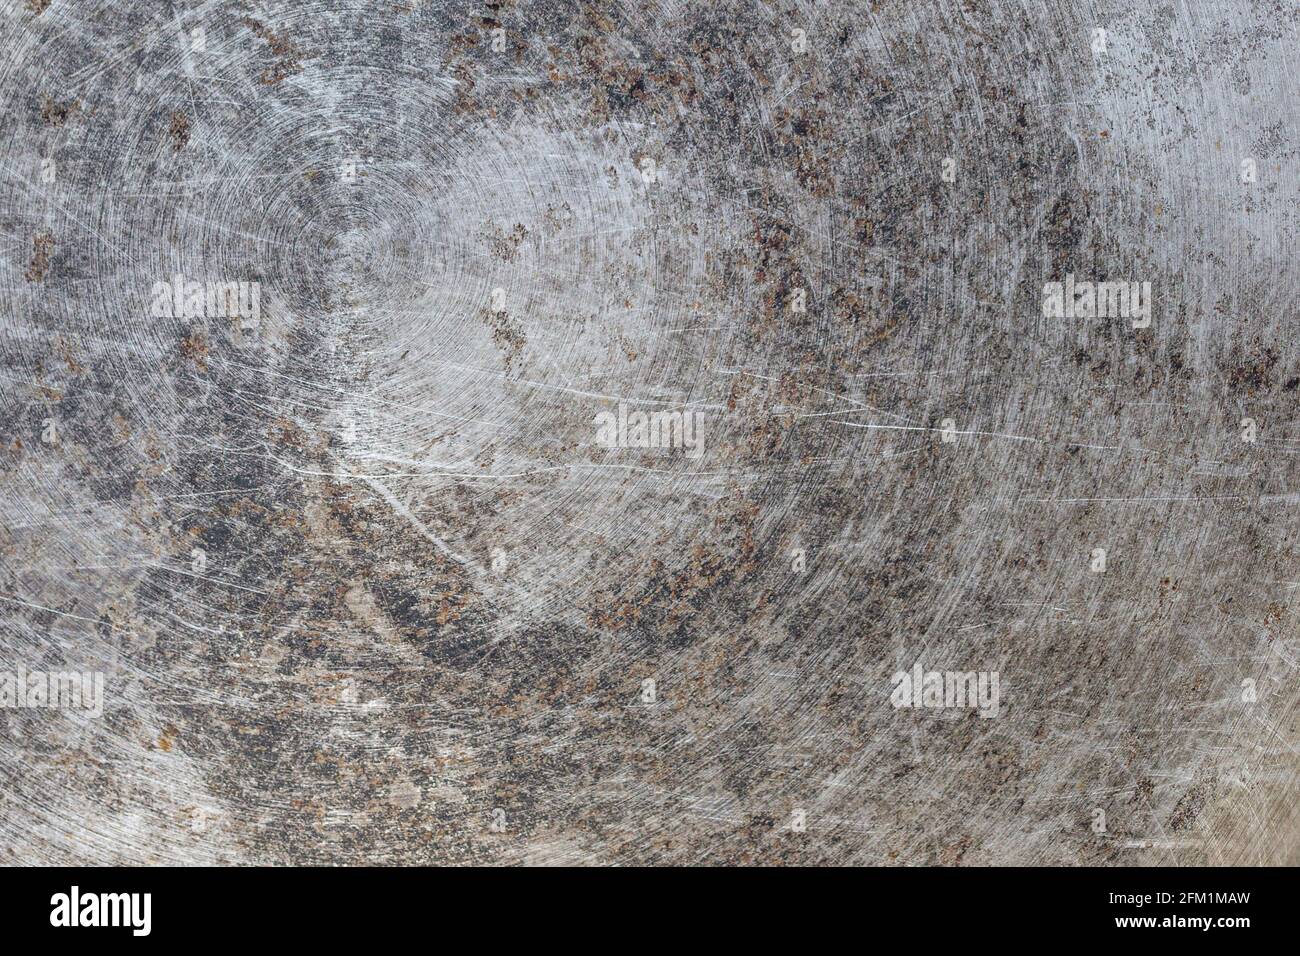 Grungy metal texture, abstract background, photography, circular details Stock Photo